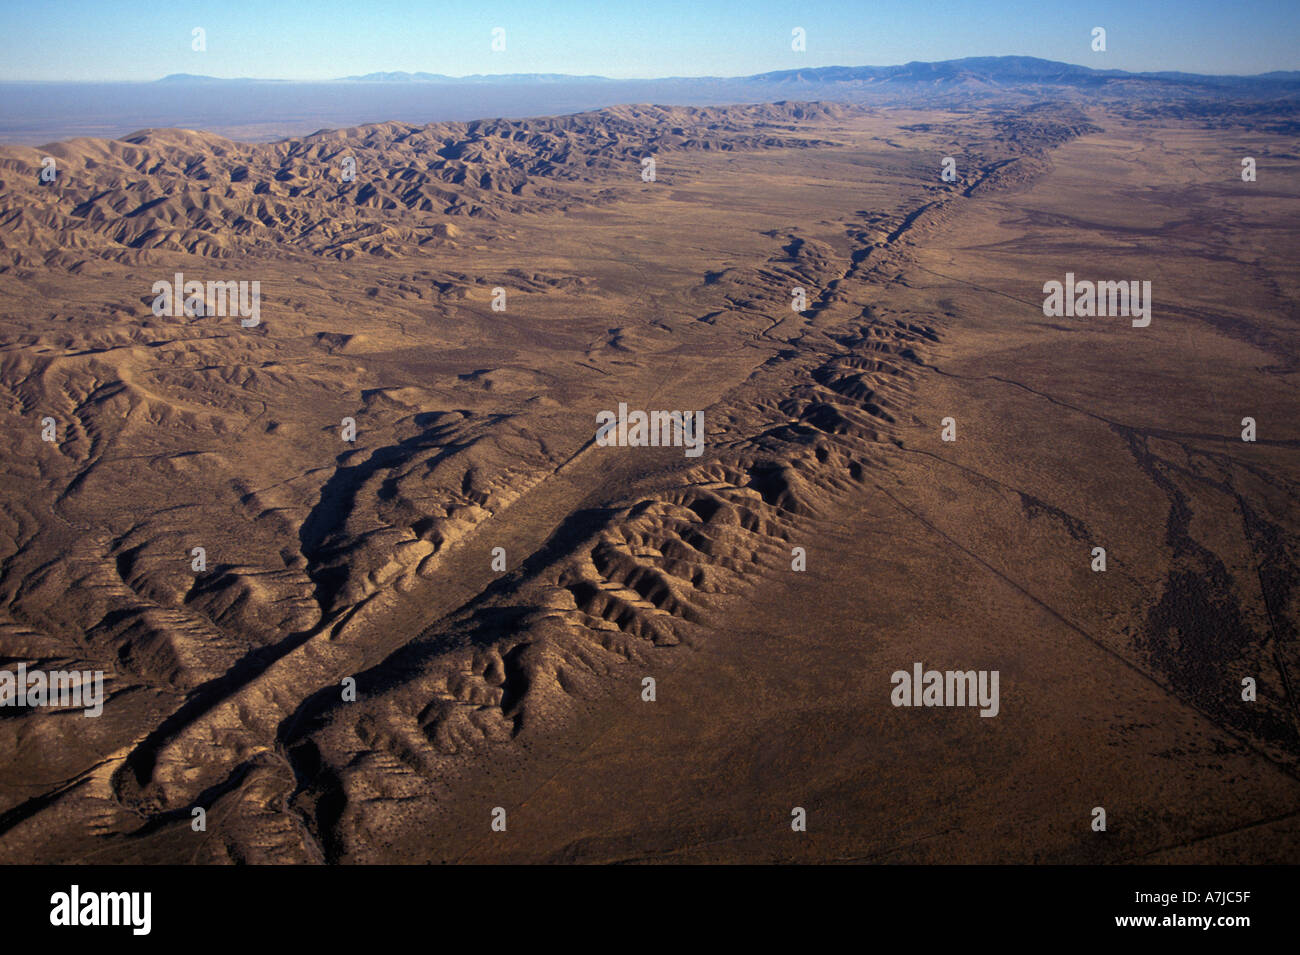 SAN ANDREAS FAULT, Aerial of fault in Carrizo Plain, Central California Stock Photo